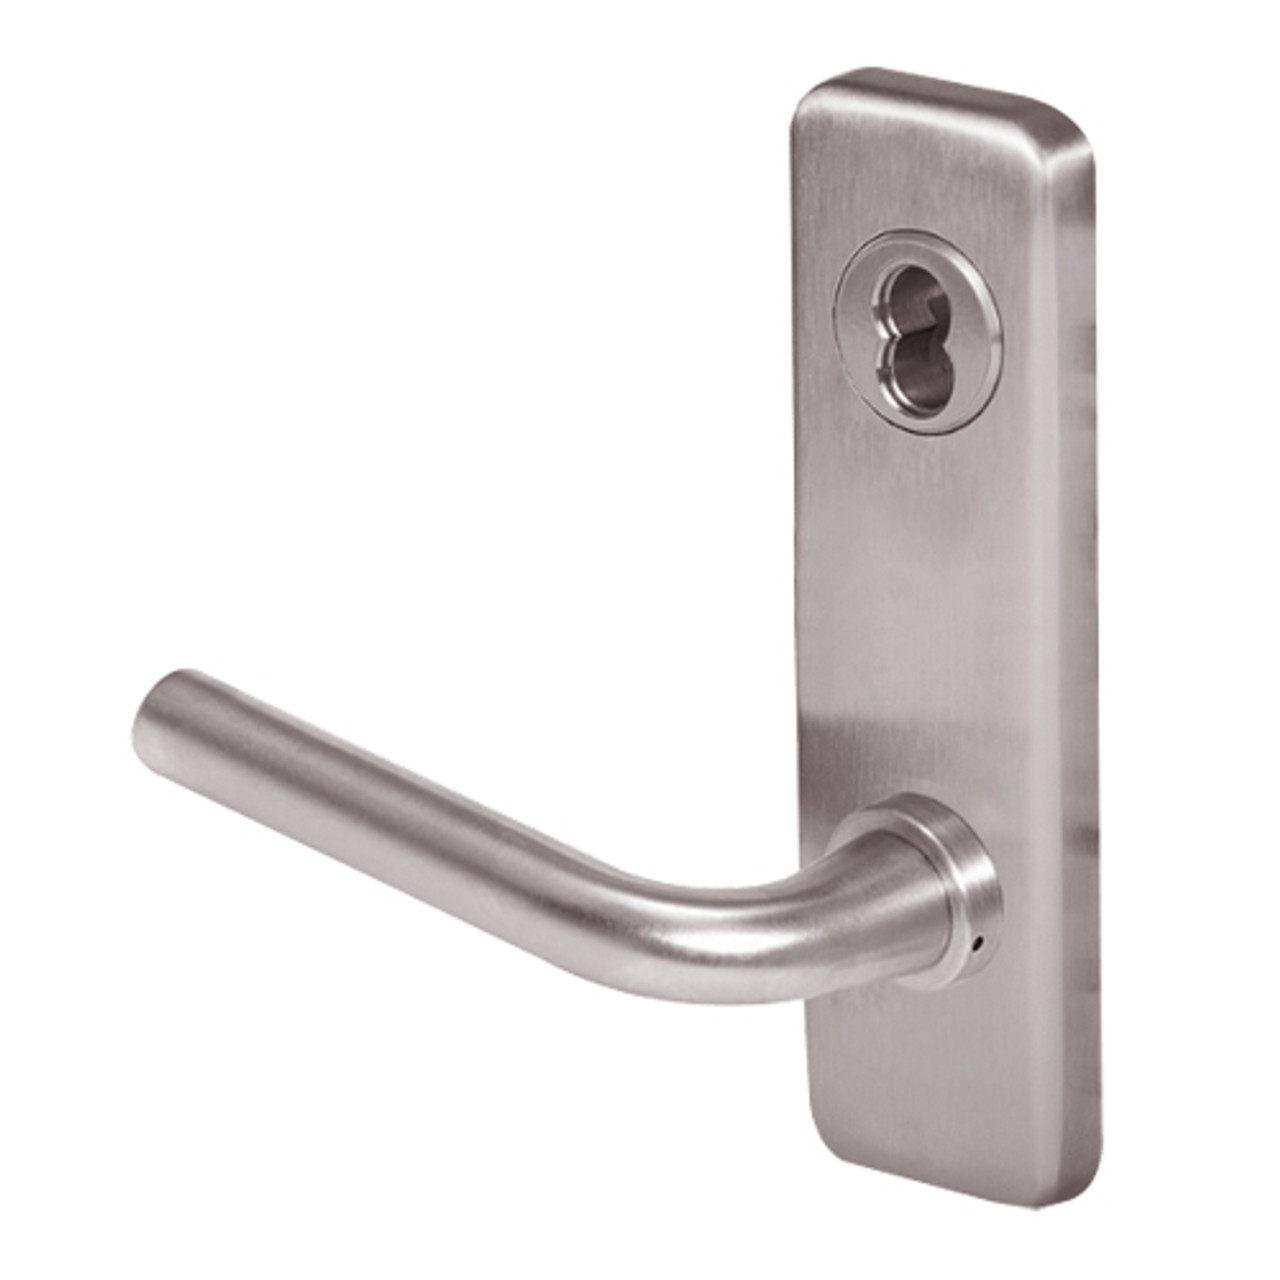 45HW7TWEL12J630RQE Best 40HW series Double Key Deadbolt Fail Safe Electromechanical Mortise Lever Lock with Solid Tube w/ No Return Style in Satin Stainless Steel